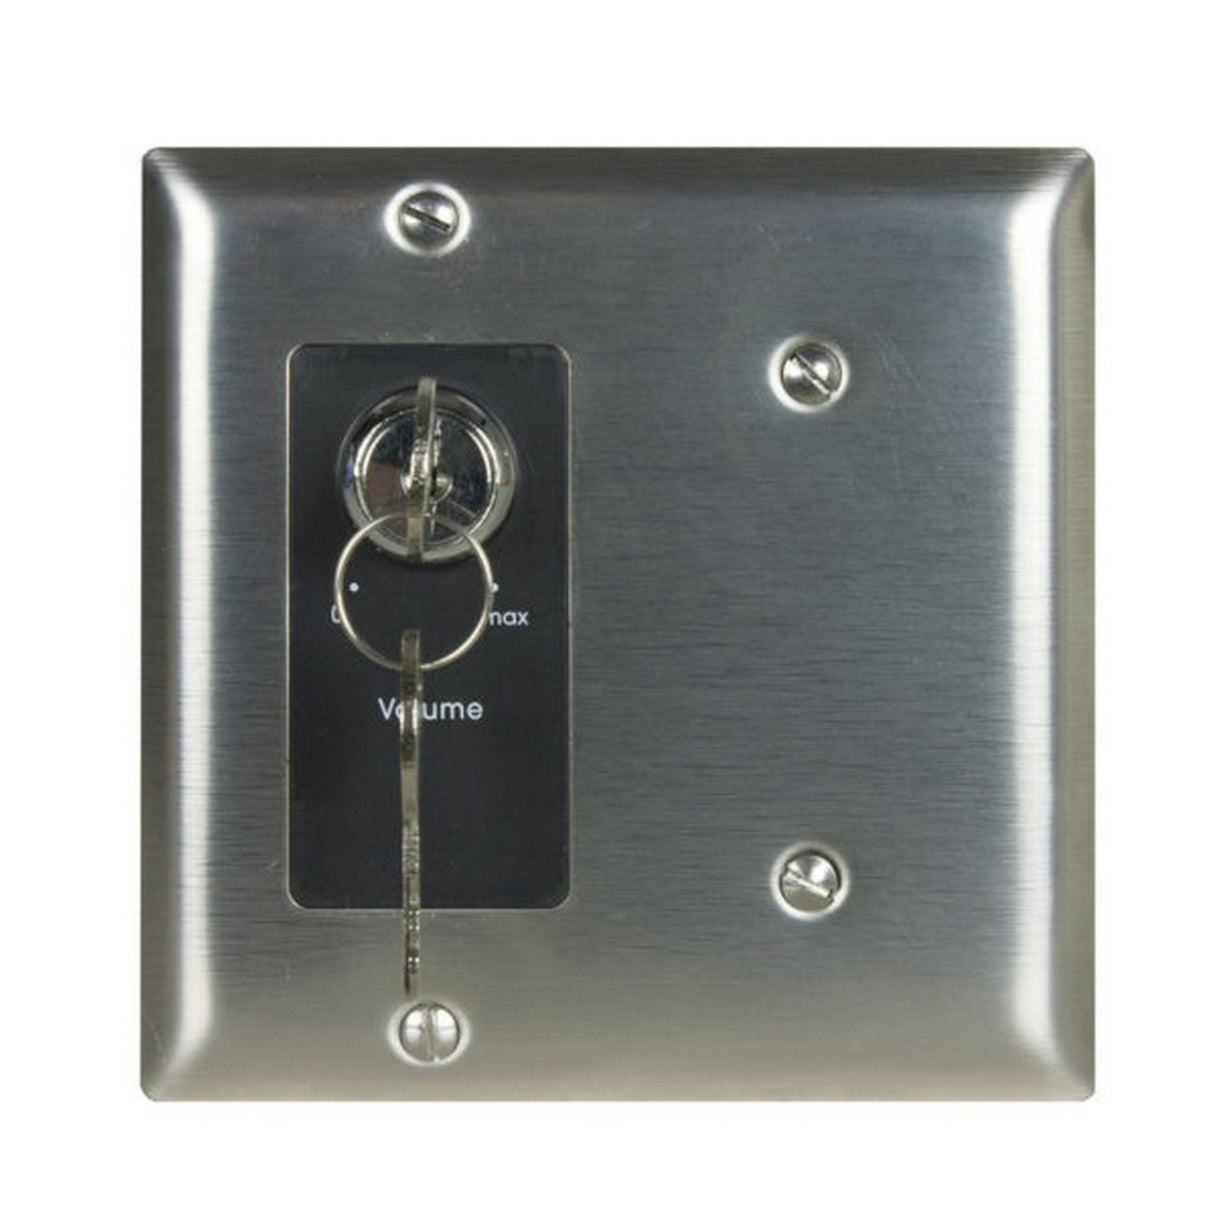 Lowell KL200-DSB 200W 2-Gang Decorator Wall Plate with Key Switch, Stainless Steel/Black